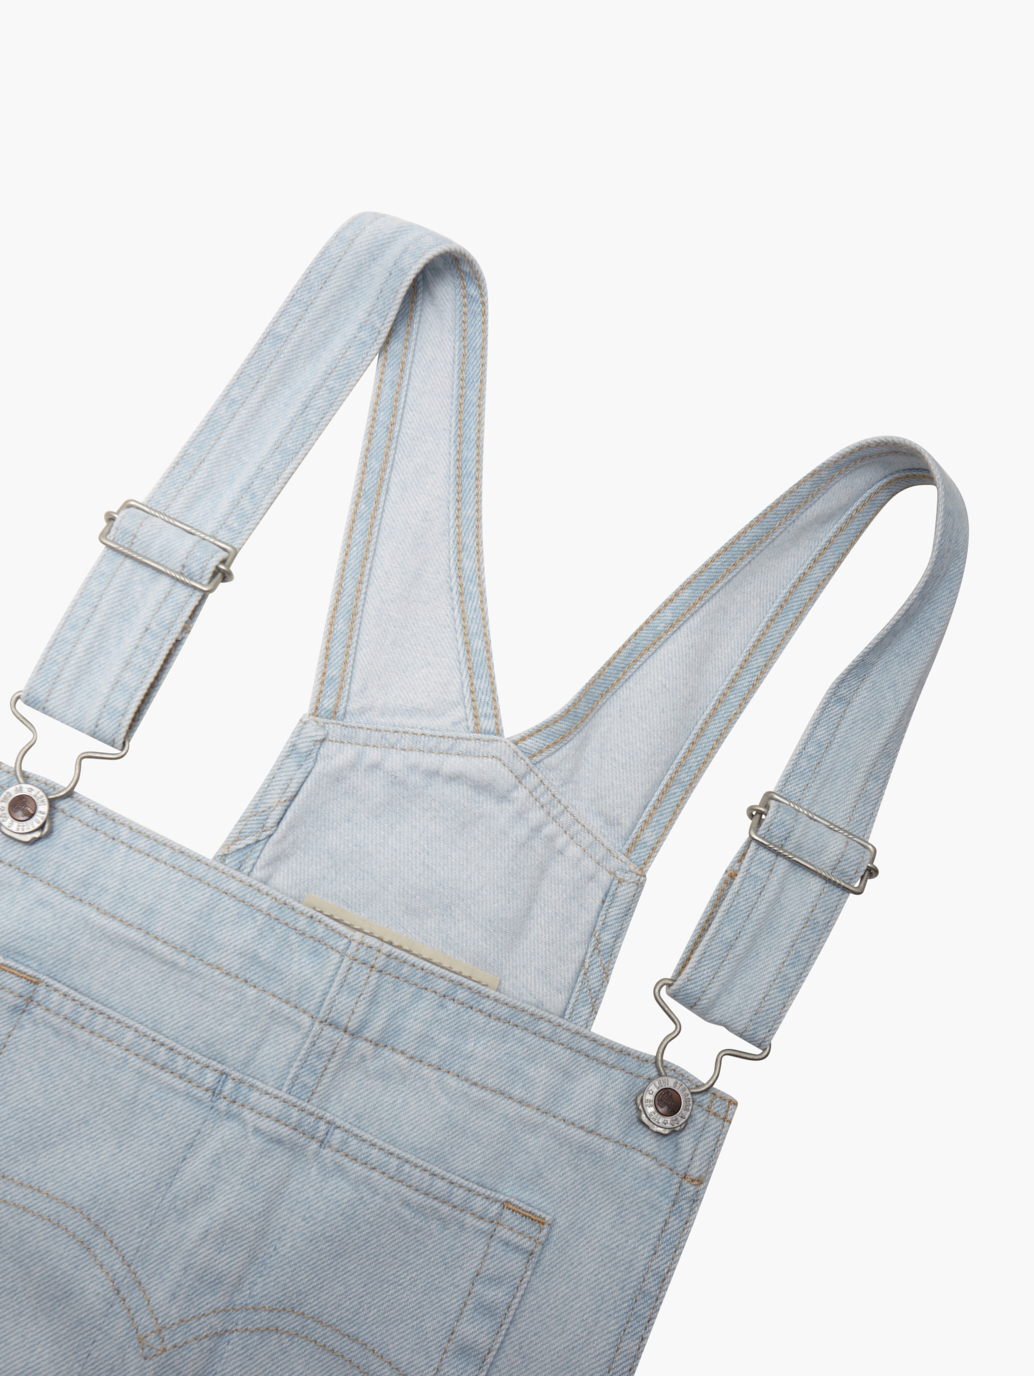 Buy Levi's® Women's SilverTab™ Overalls | Levi's® Official Online Store PH